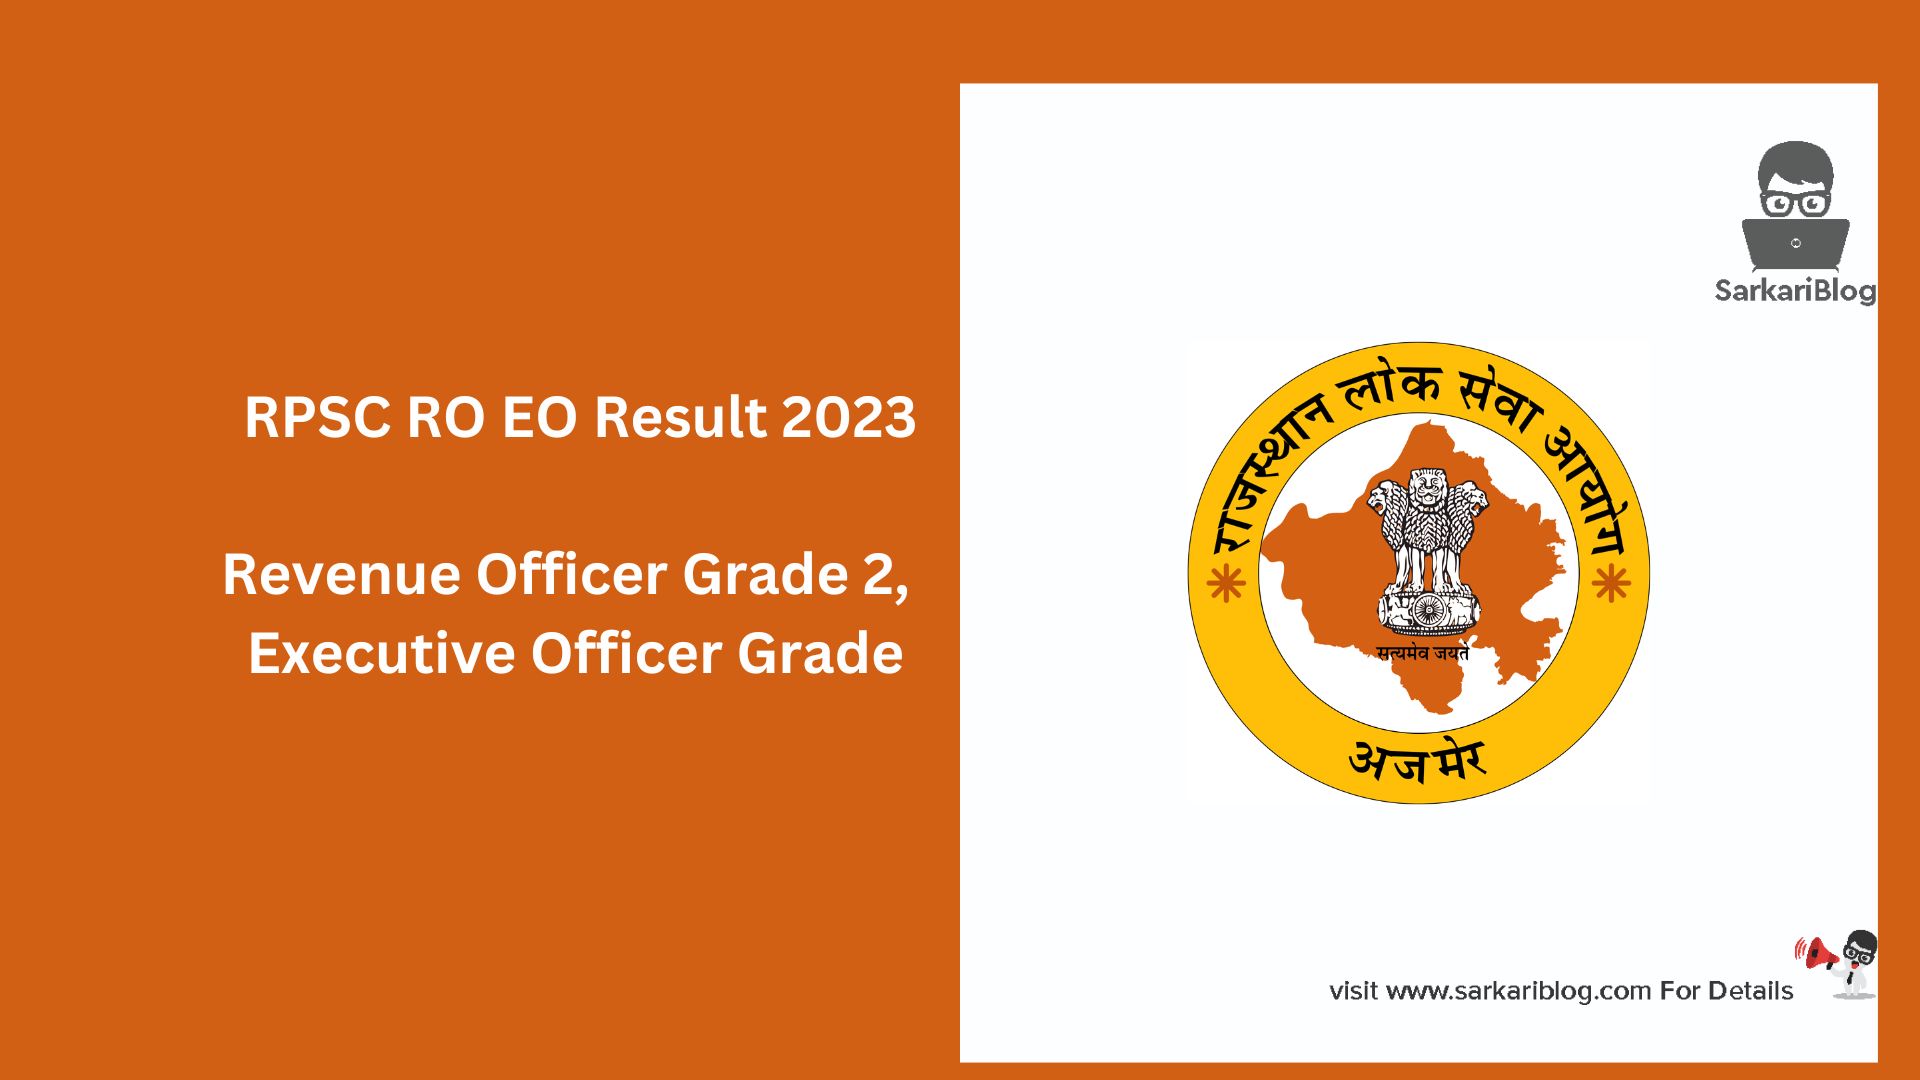 RPSC RO EO Result 2023